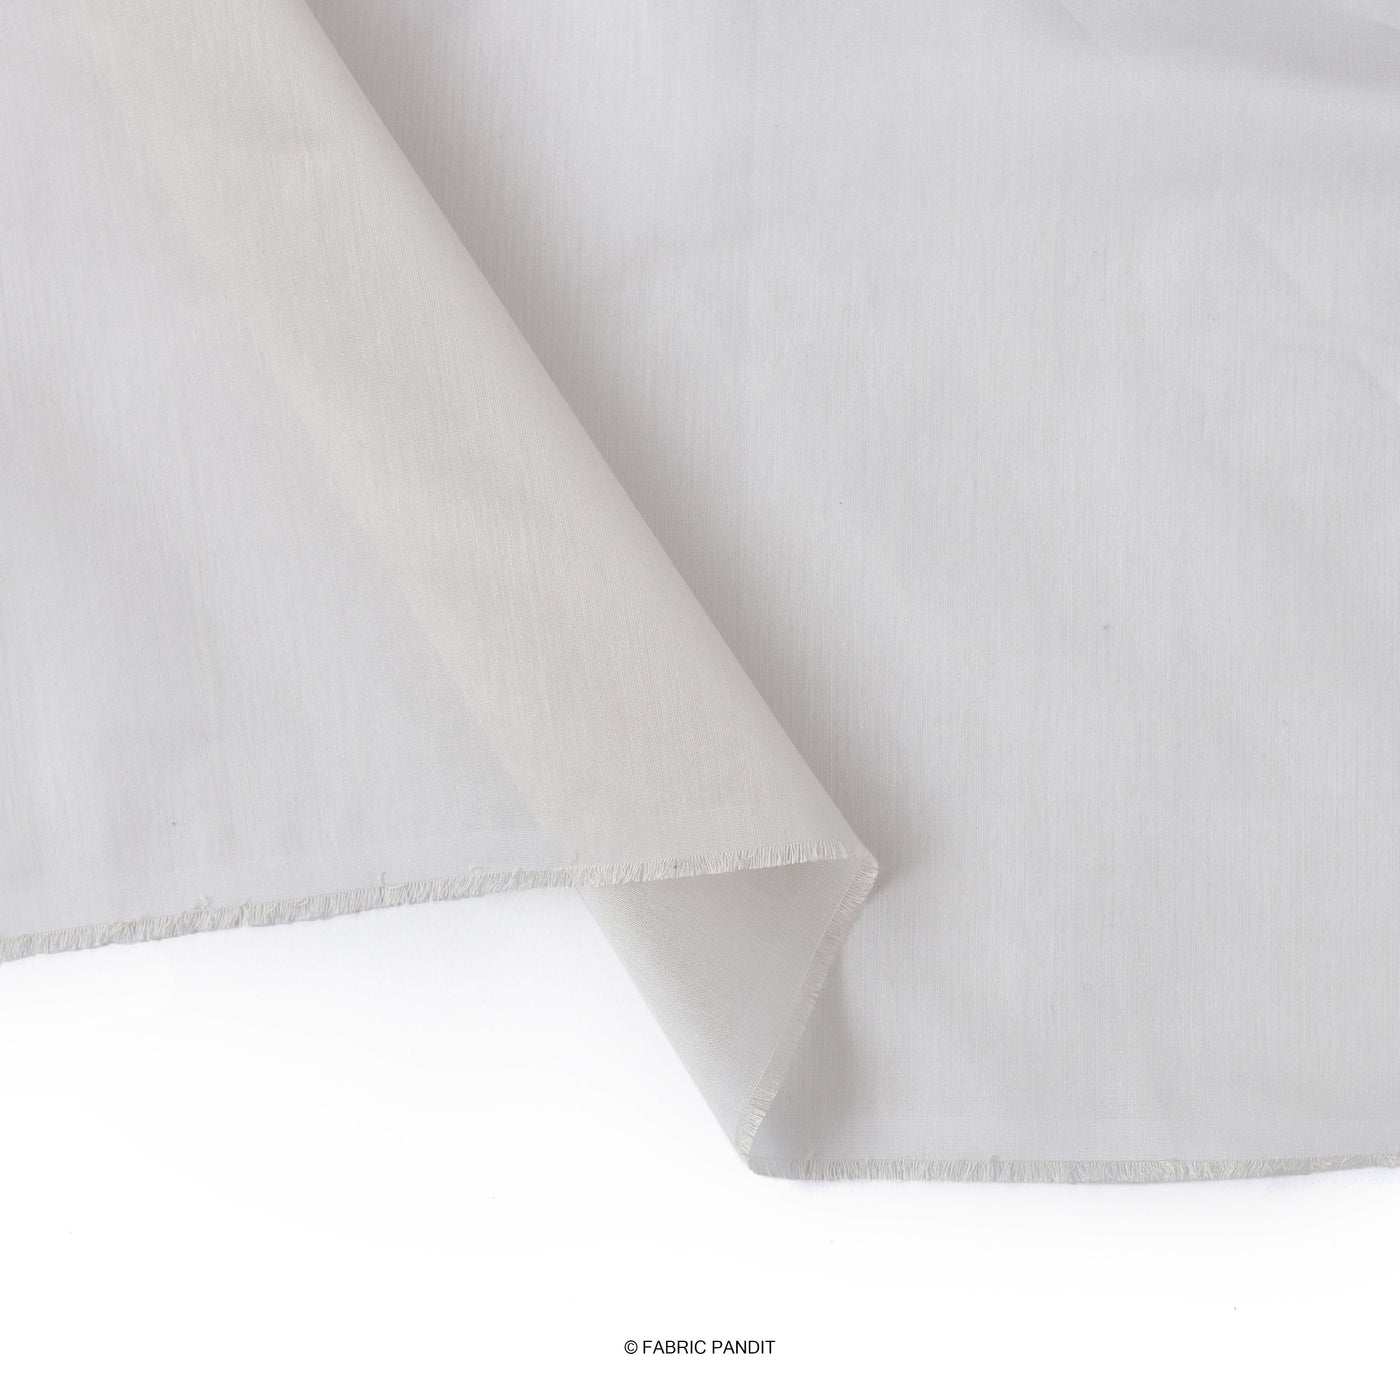 Fabric Pandit Fabric Off-White Color Plain Chanderi Fabric (Width 43 Inches)